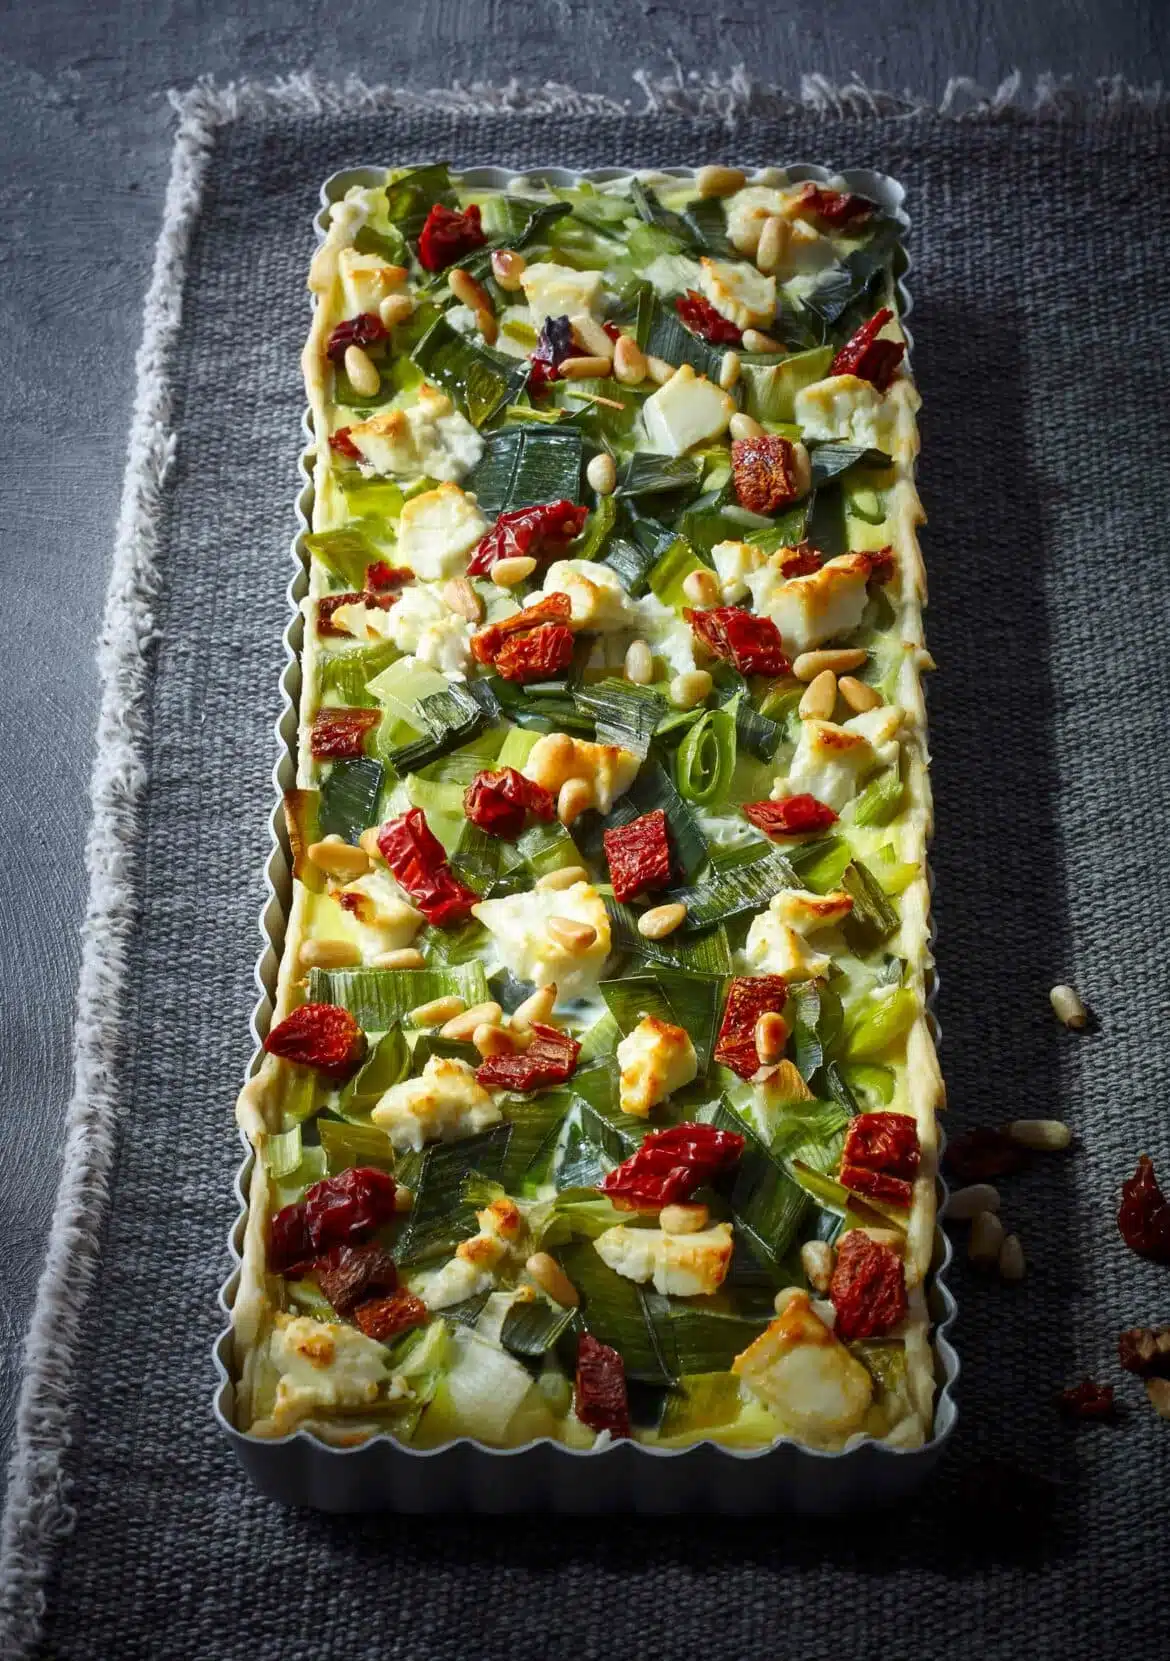 Leek Quiche with Feta, Dried Tomatoes & Pine Nuts